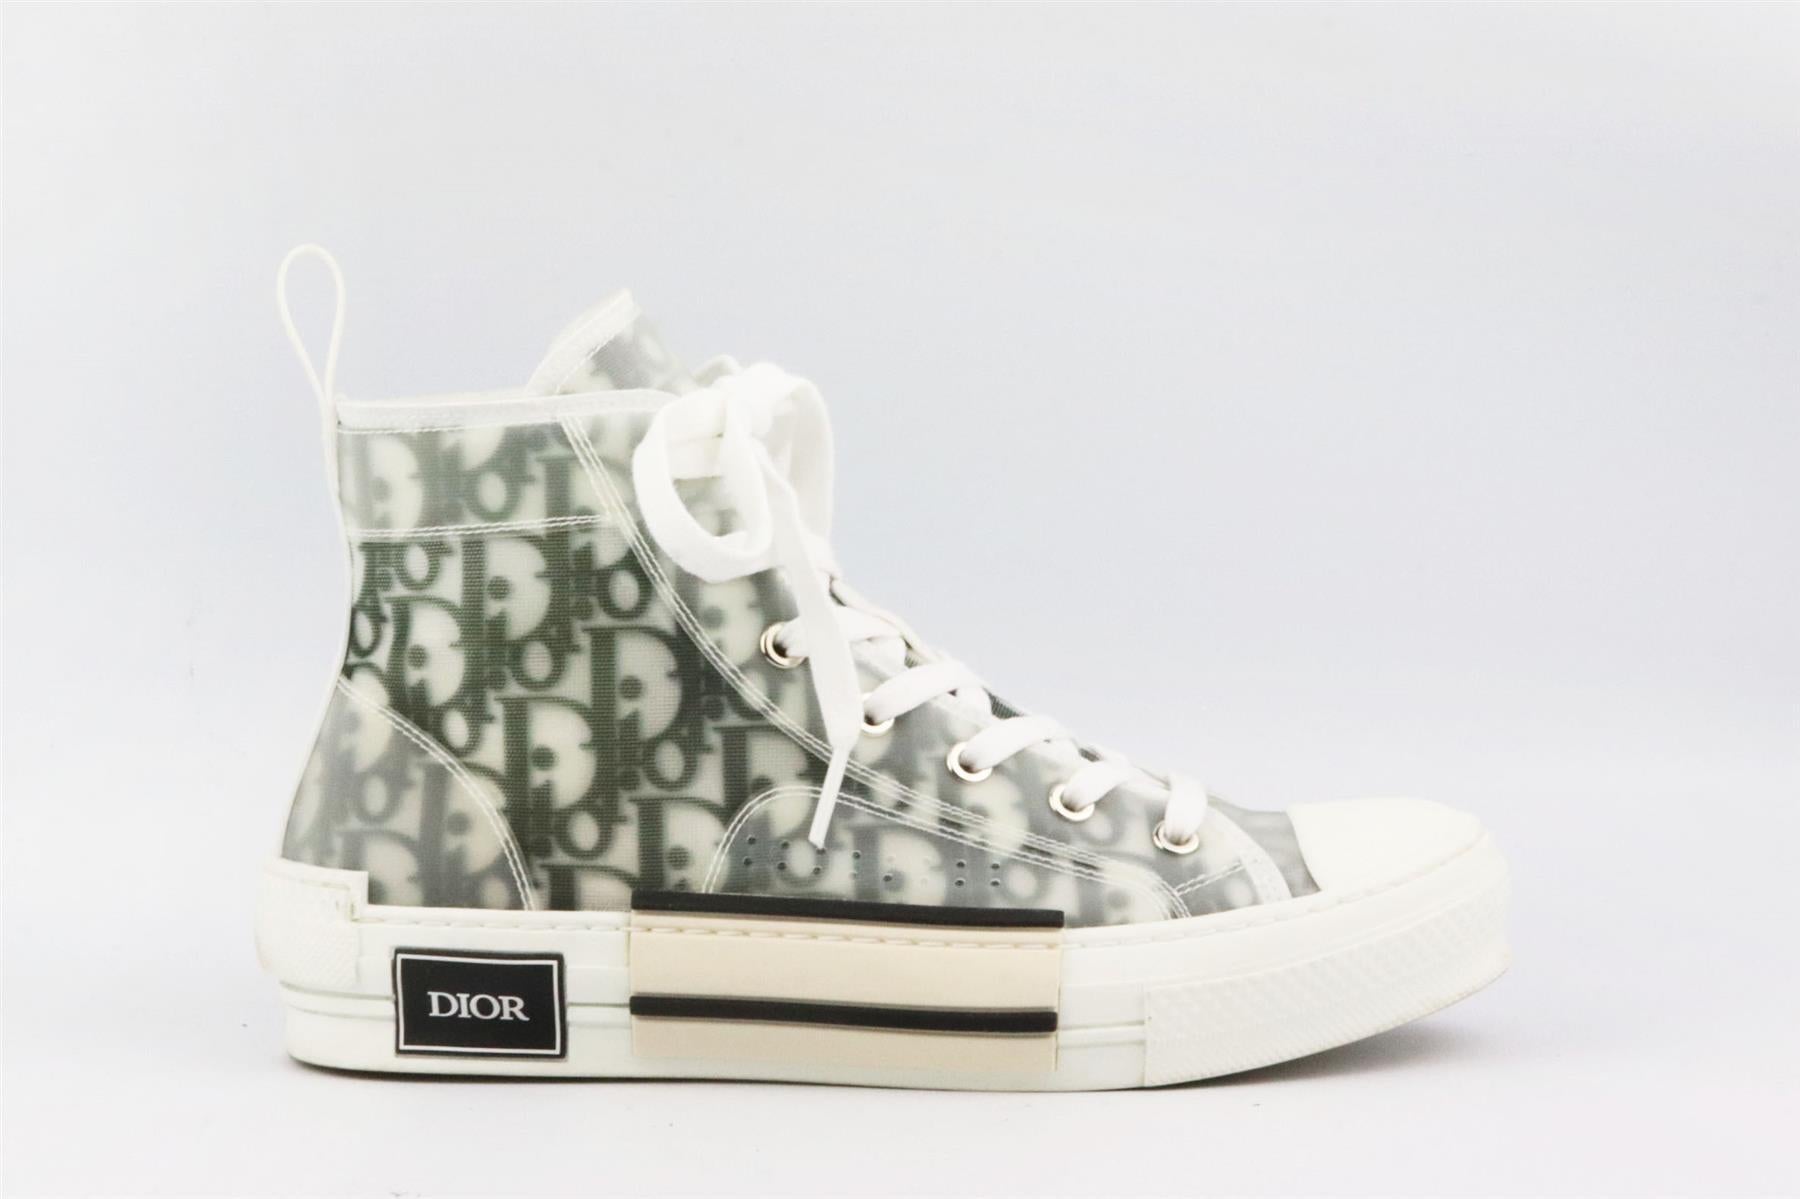 These ‘B23’ sneakers by Christian Dior have been made in Italy from black and white oblique logo canvas in a high-top silhouette, it’s finished with the brand’s iconic logo on the rubber soles. Rubber sole measures approximately 38 mm/ 1.5 inches.